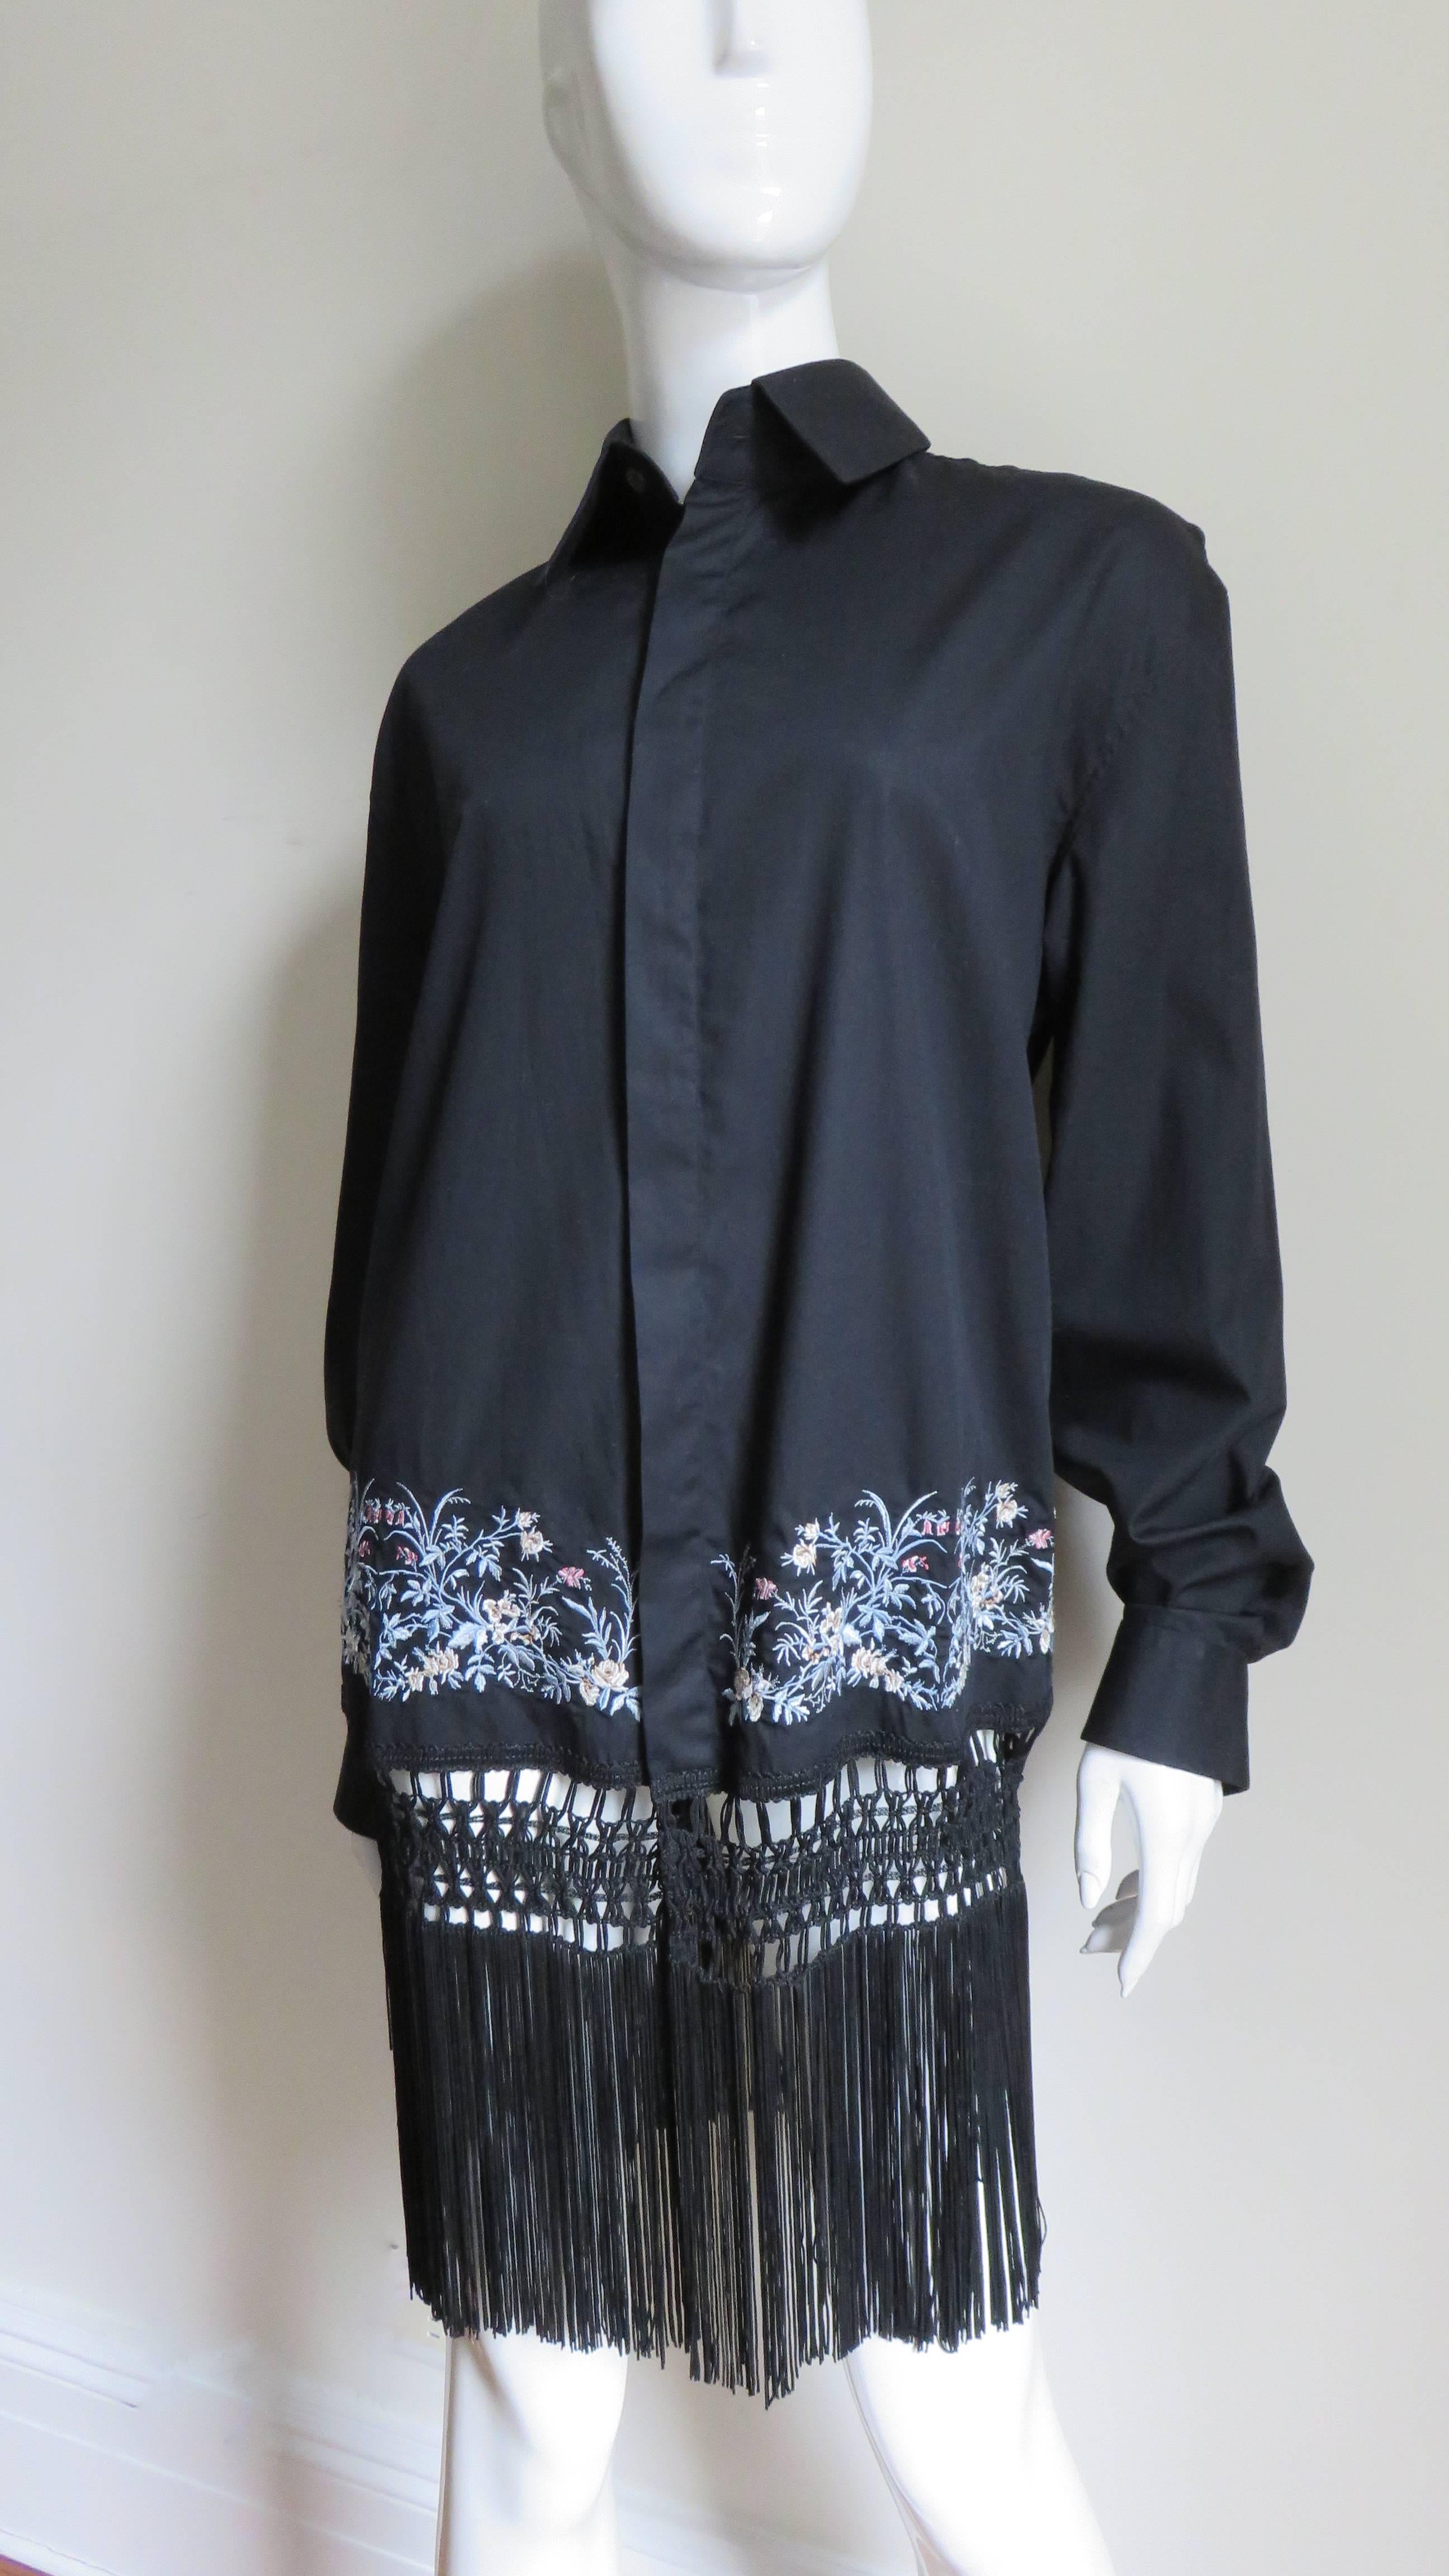 Alexander McQueen New Fringe Embroidery Shirt S/S 1999 In Excellent Condition For Sale In Water Mill, NY